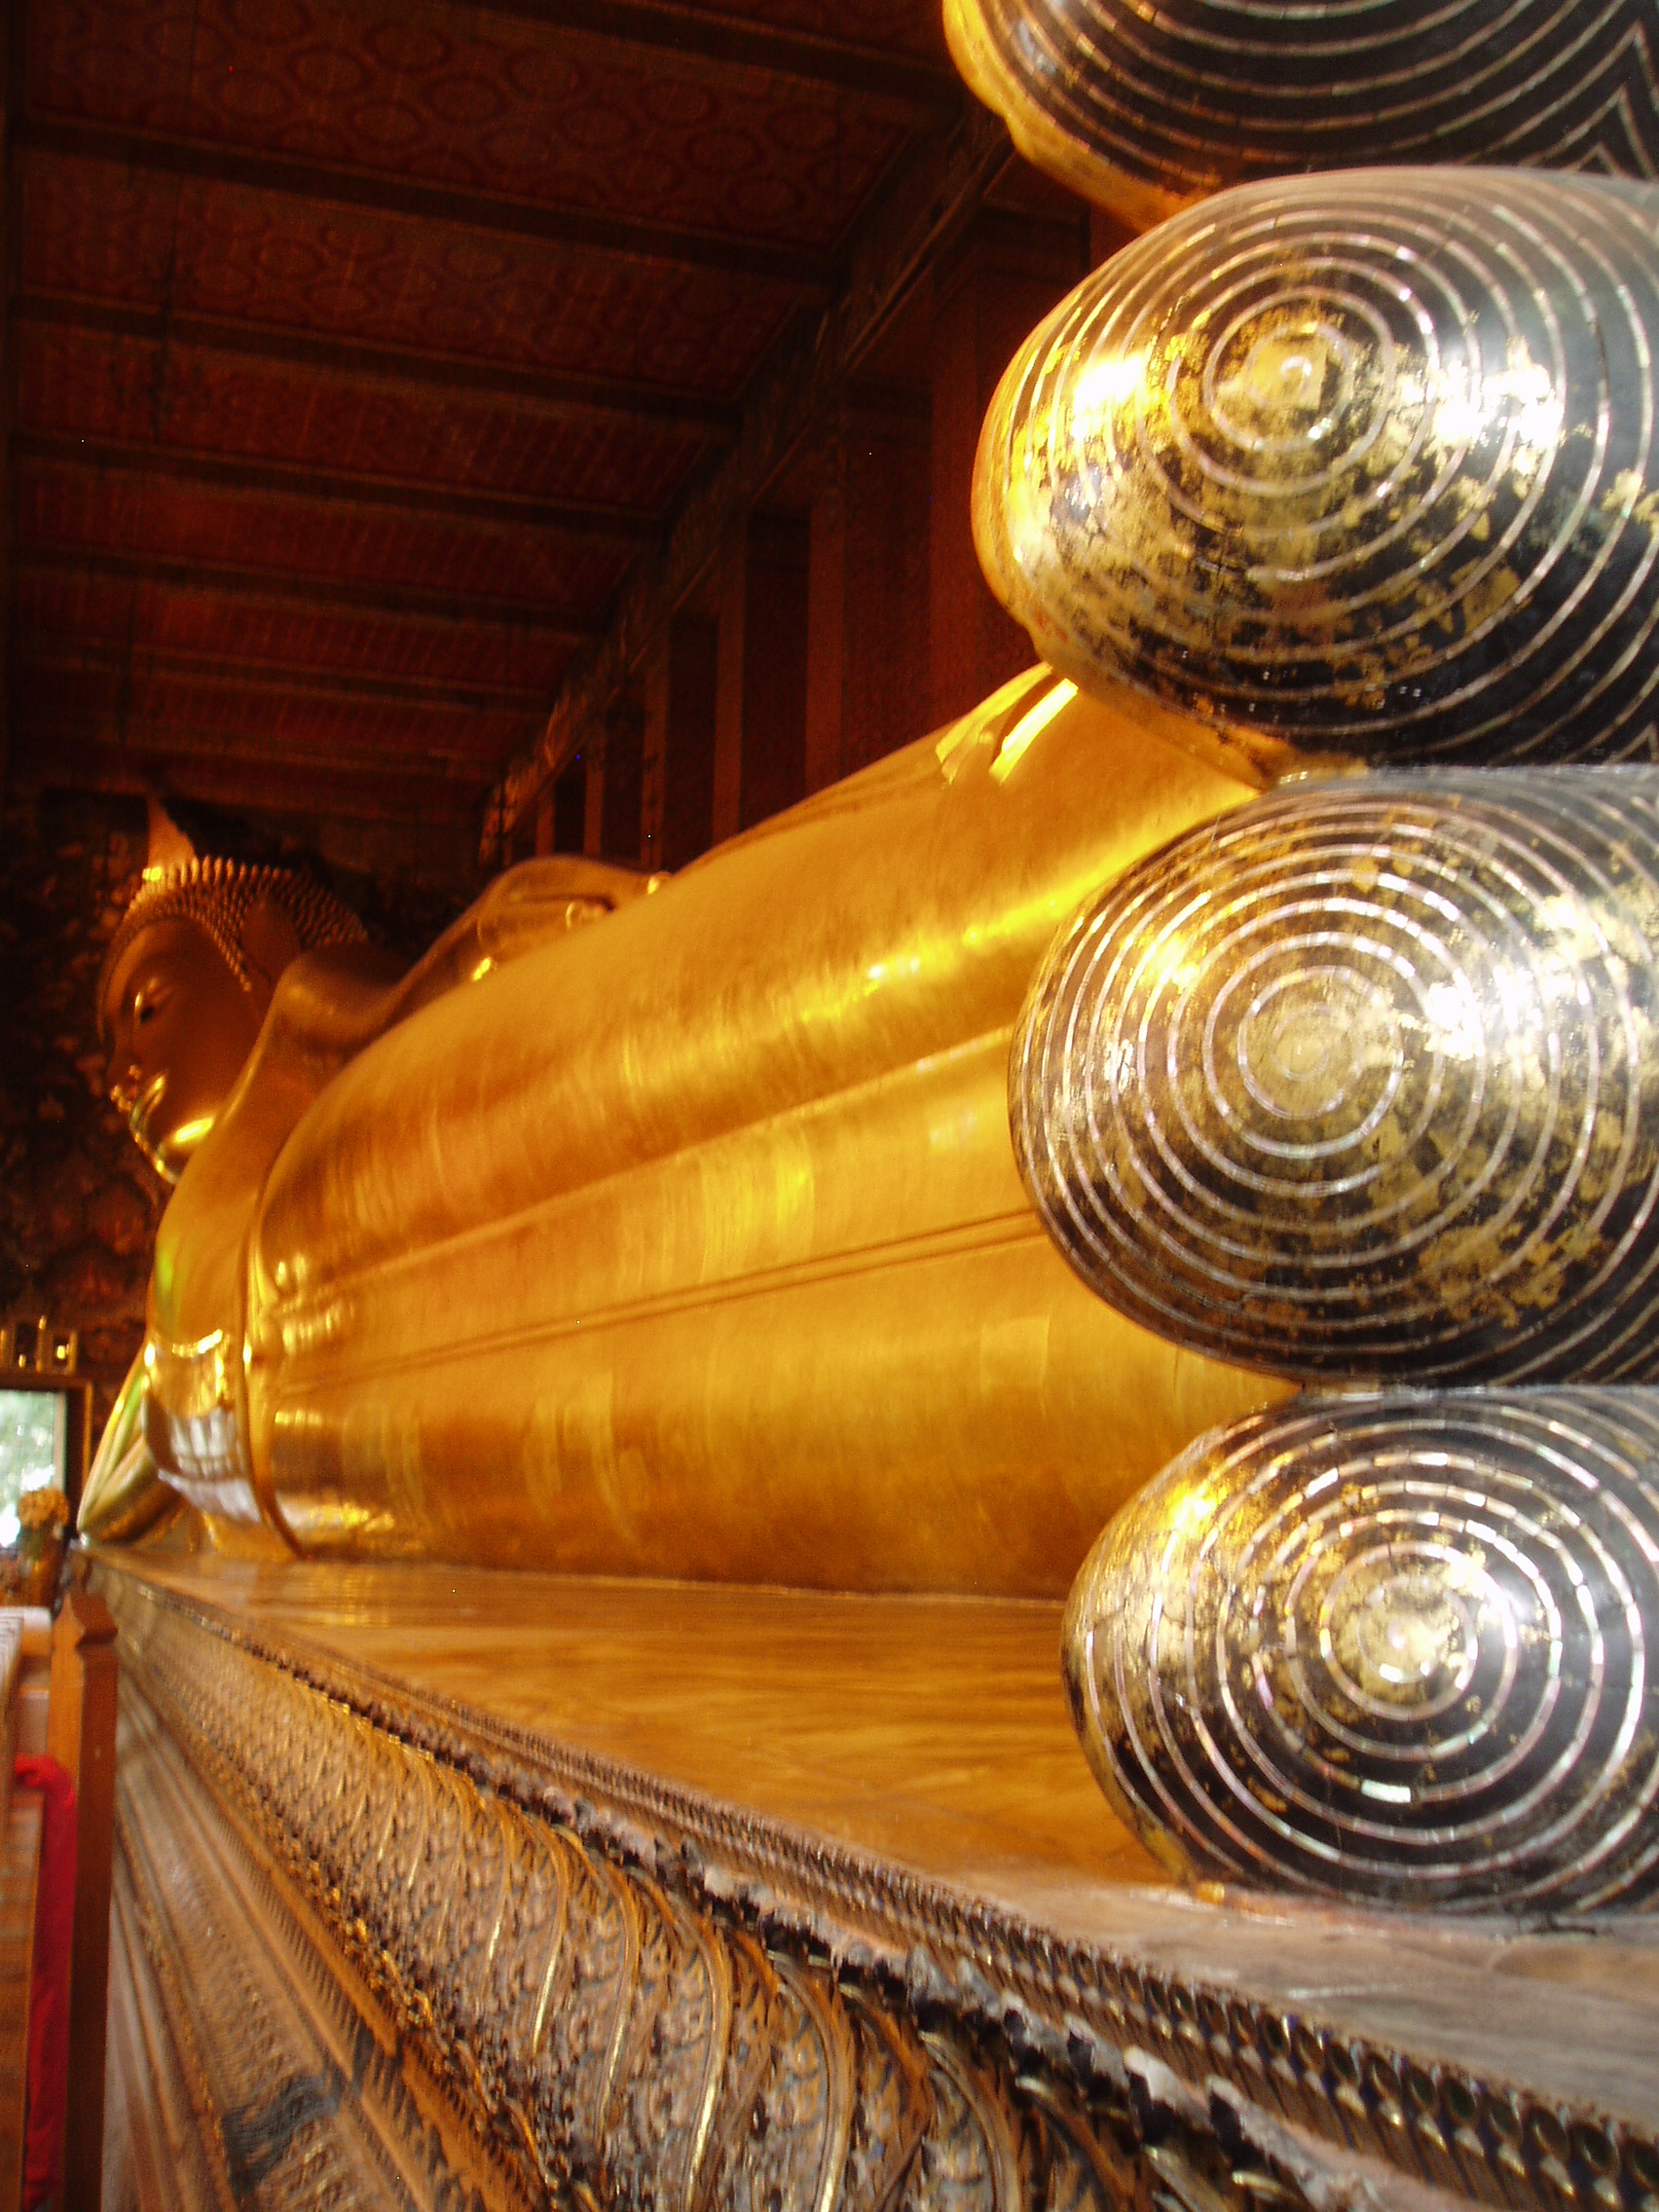 Reclining Buddha, Wat Pho, Bangkok Wat Pho is the largest and oldest temple complex in Bangkok, and along with the temmple of the royal palace the most visited. The sprawling complex covers a huge area and it is quite easy to lose oneself within it's series of courtyards, gateways and stunning temple buildings. The present complex largely dates back to 1788, having been founded in response to the sacking of the former capital Ayutthaya by the Burmese in 1767 where a similar complex was destroyed. It is known as a place of learning and has a renowned school of Thai massage within the site. The temple complex is entered through one of many gateways guarded by huge Chinese statues, believed to have been imported as ballast on ships trading with China..The outer gates have fierce warrior figures, whilst the inner courtyards have the bizarre 'farang' ('foreigner') figures with their peculiar 'top hats', believed to represent the first European visitors to the east. Many of the inner courtyards are surrounded by a cloister containing over 400 sculptures of the seated Buddha, whilst the main Bot, the spiritual nucleus of the temple, is beautifully decorated within with frescoes of rich landscapes in red and gold. The biggest and most spectacular attraction of the temple however is the Hall of the Reclining Buddha, housing an enormous gilded recumbent figure of the Buddha over 160ft long, filling the entire centre of the chamber. en.wikipedia.org/wiki/Wat_Pho